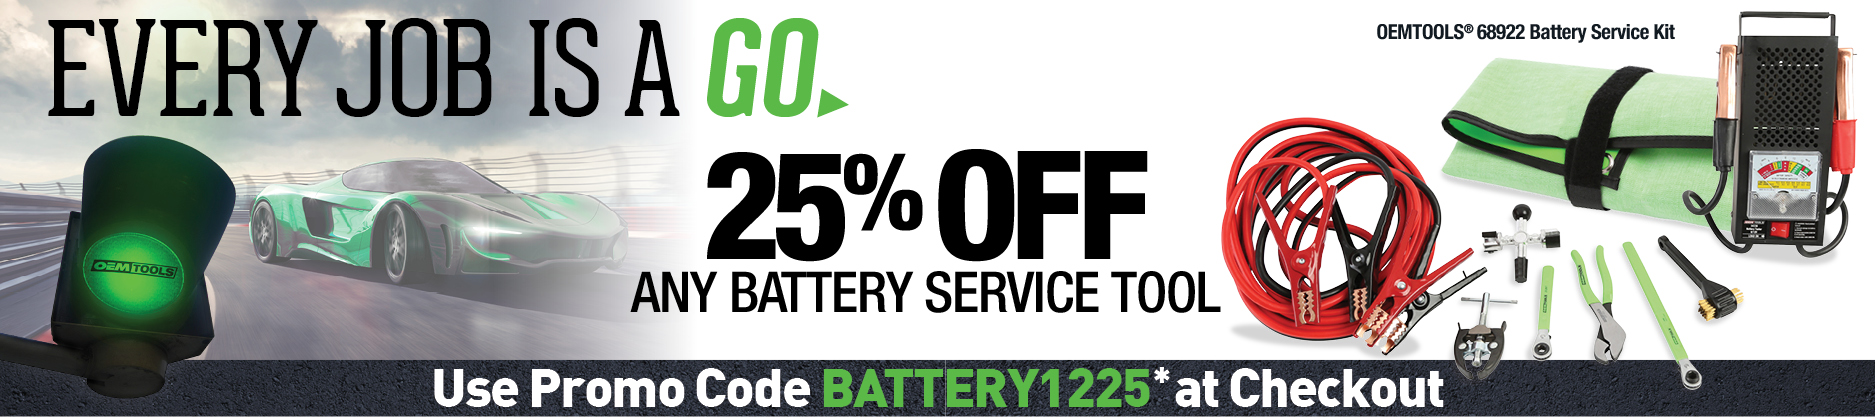 25% OFF Any Battery Service Tool